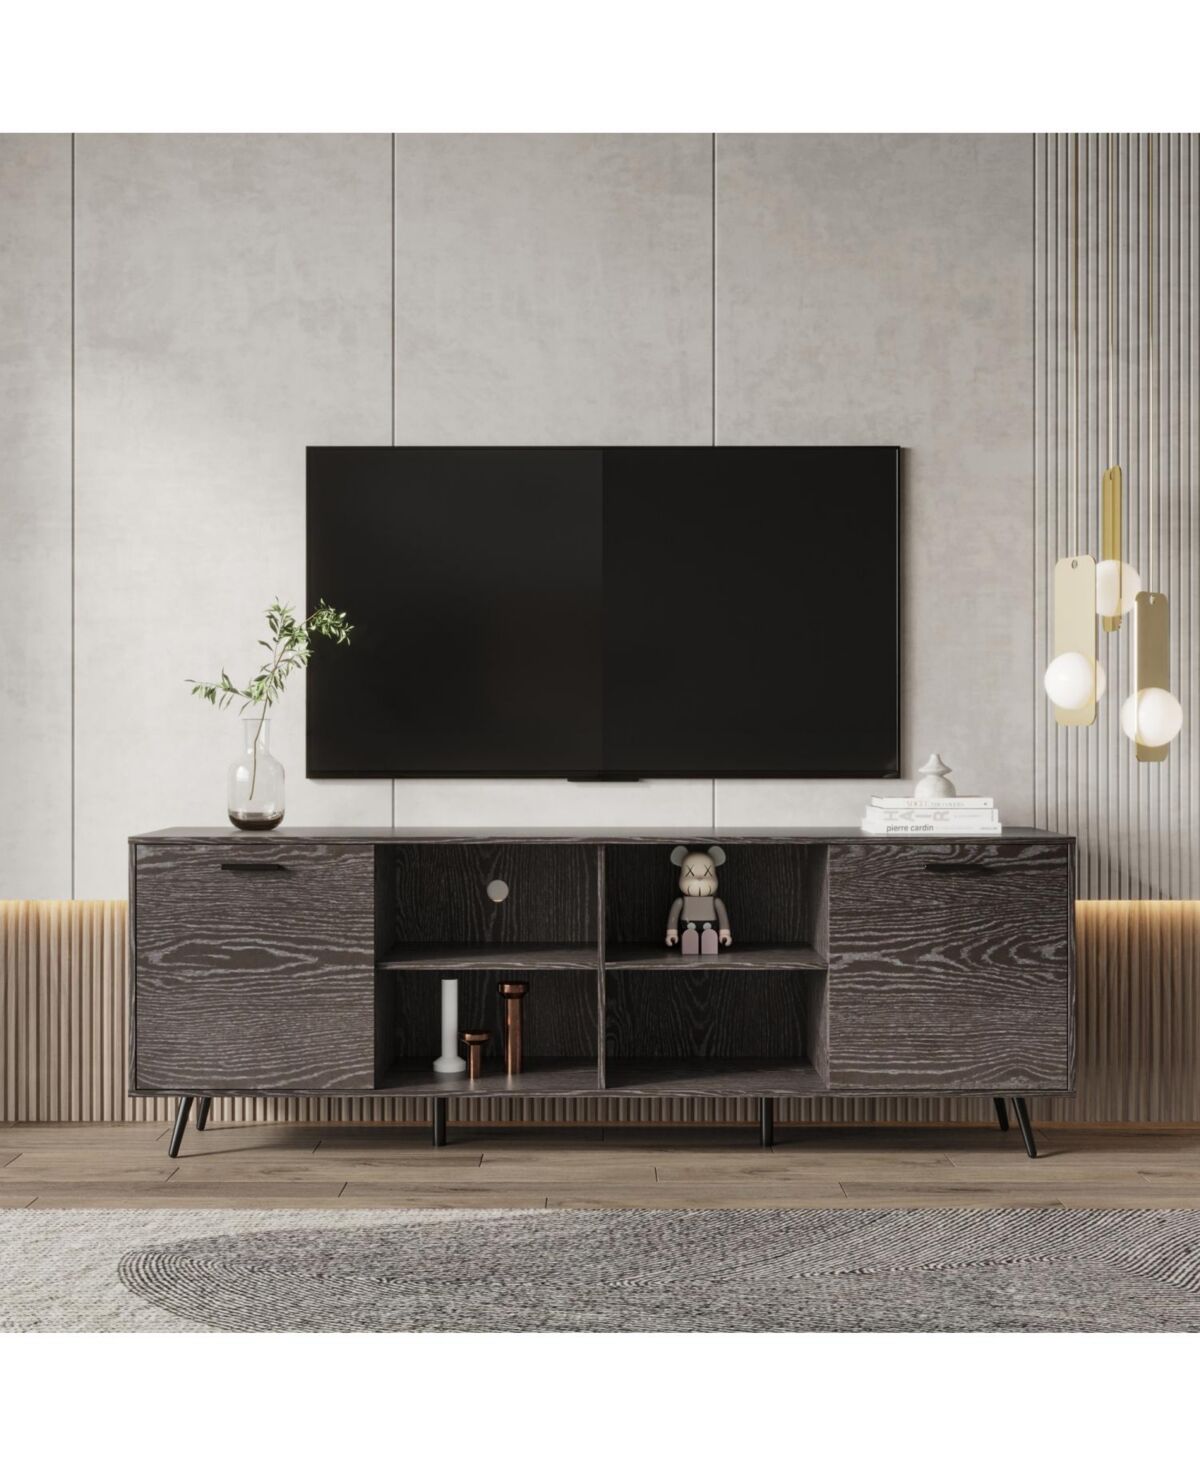 Simplie Fun Tv Stand Mid-Century Wood Modern Entertainment Center Adjustable Storage Cabinet Tv Console for Living Room - Grey